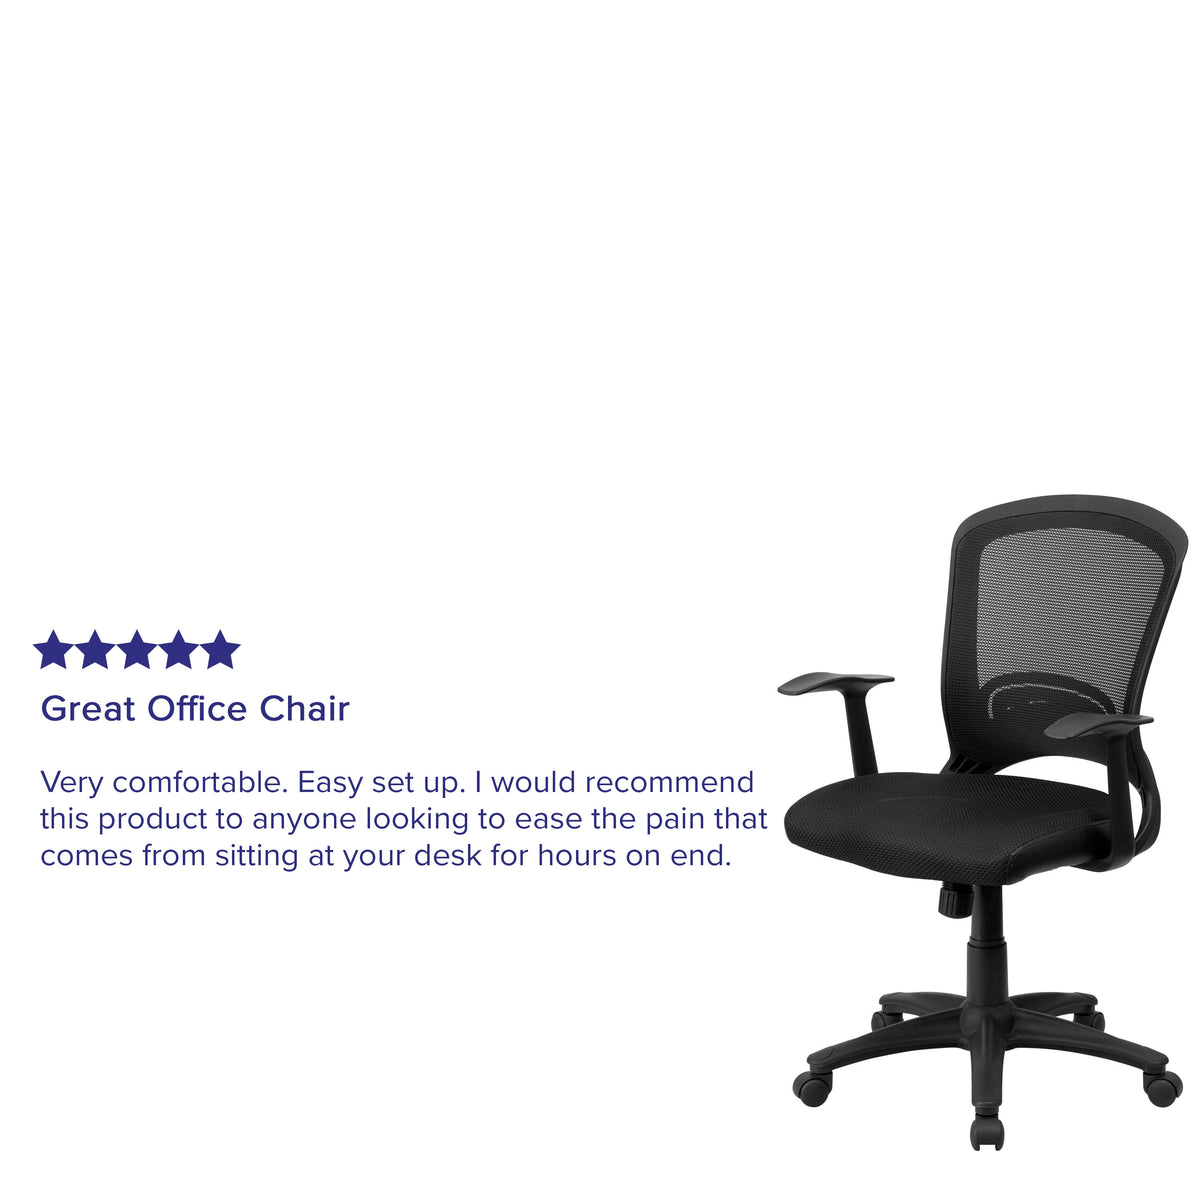 Mid-Back Designer Black Mesh Swivel Task Office Chair with Arms